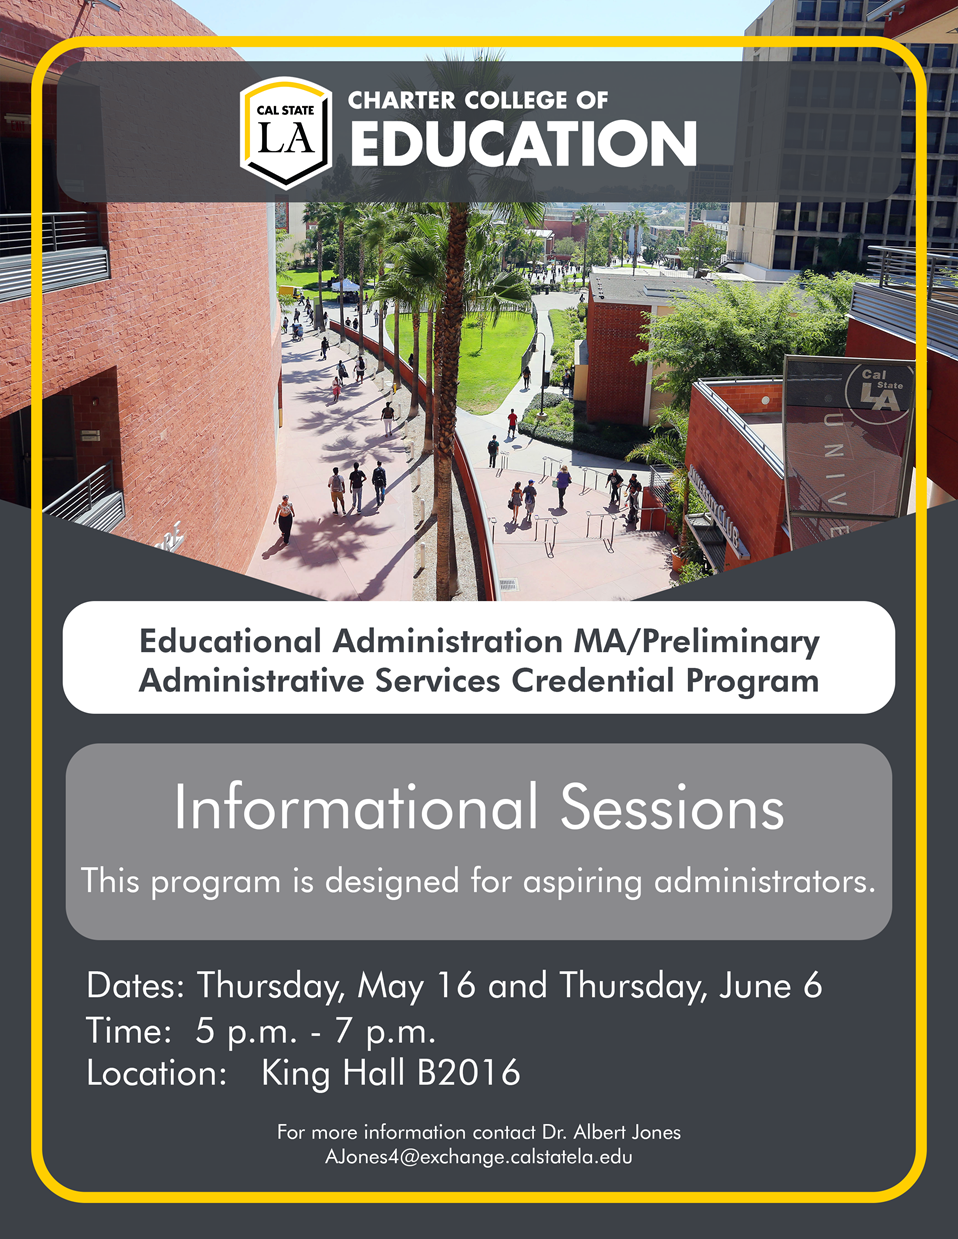 Educational Administration Information Sessions